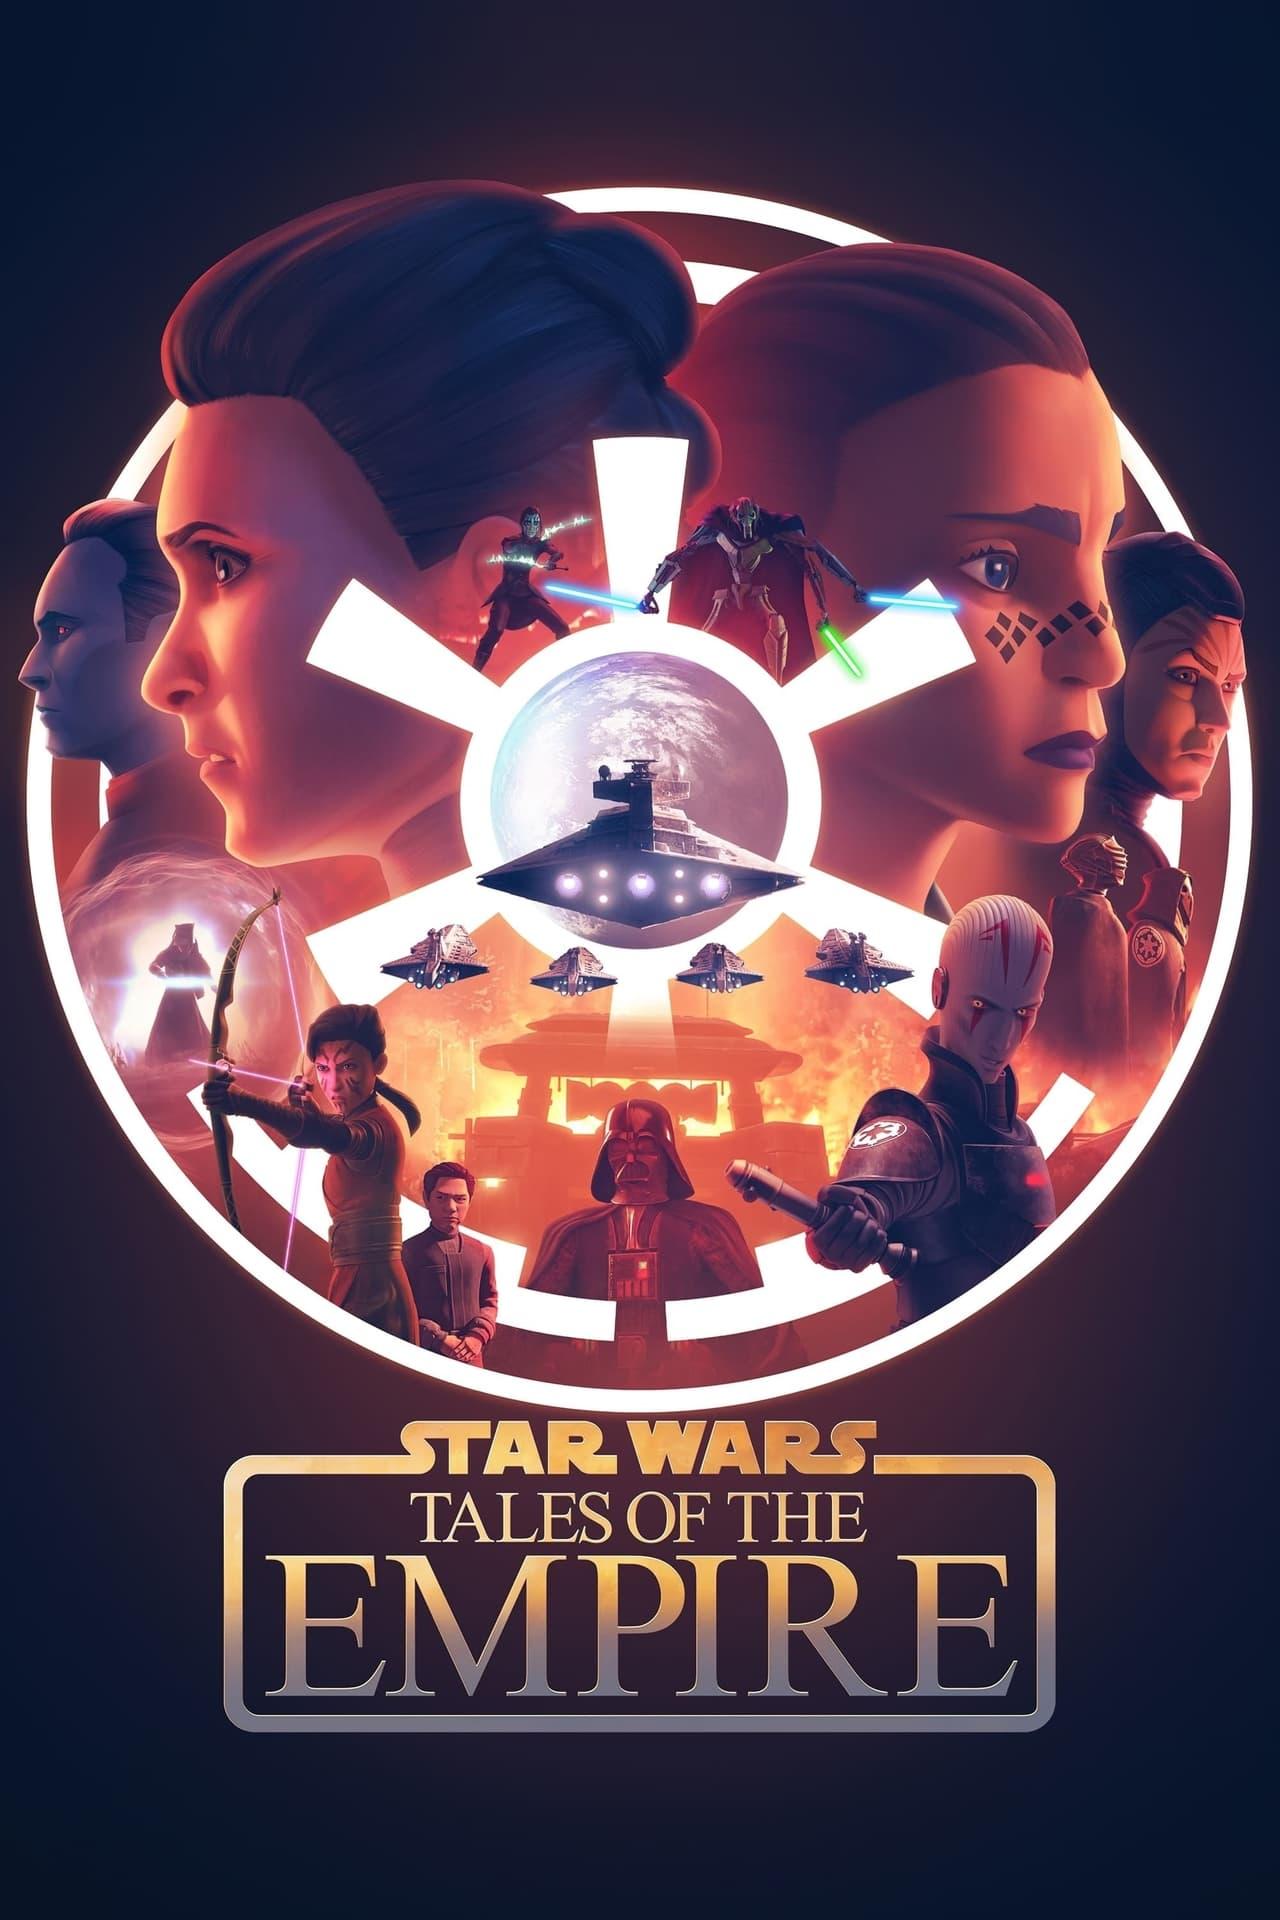 Star Wars: Tales of the Empire | awwrated | 你的 Netflix 避雷好幫手!